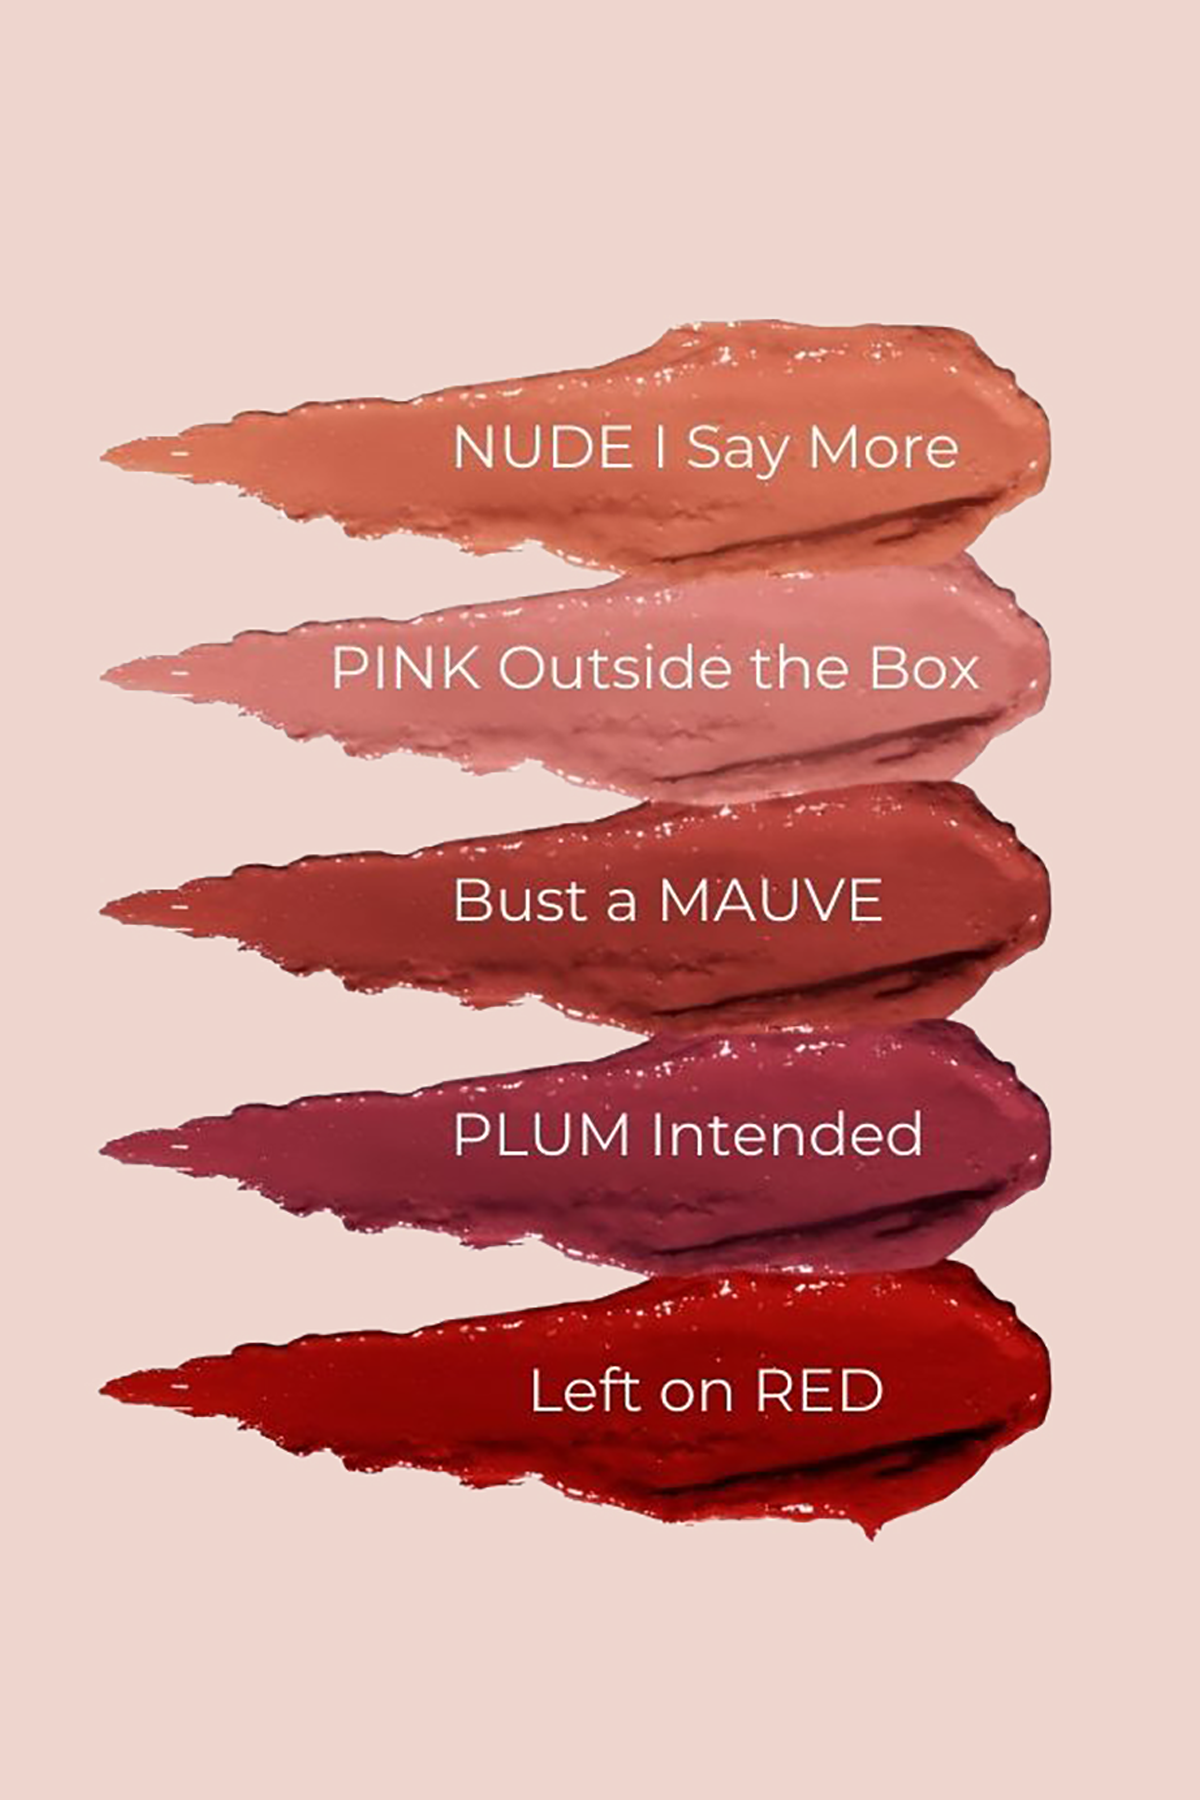 Lipstick shades  Red Long-lasting Matte lipstick Moisturizing  Waterproof  Hydrating Red lipstick Nude lipstick Lipstick trends color guide application tips Lipstick for different skin tones Lip gloss  Lip pencil